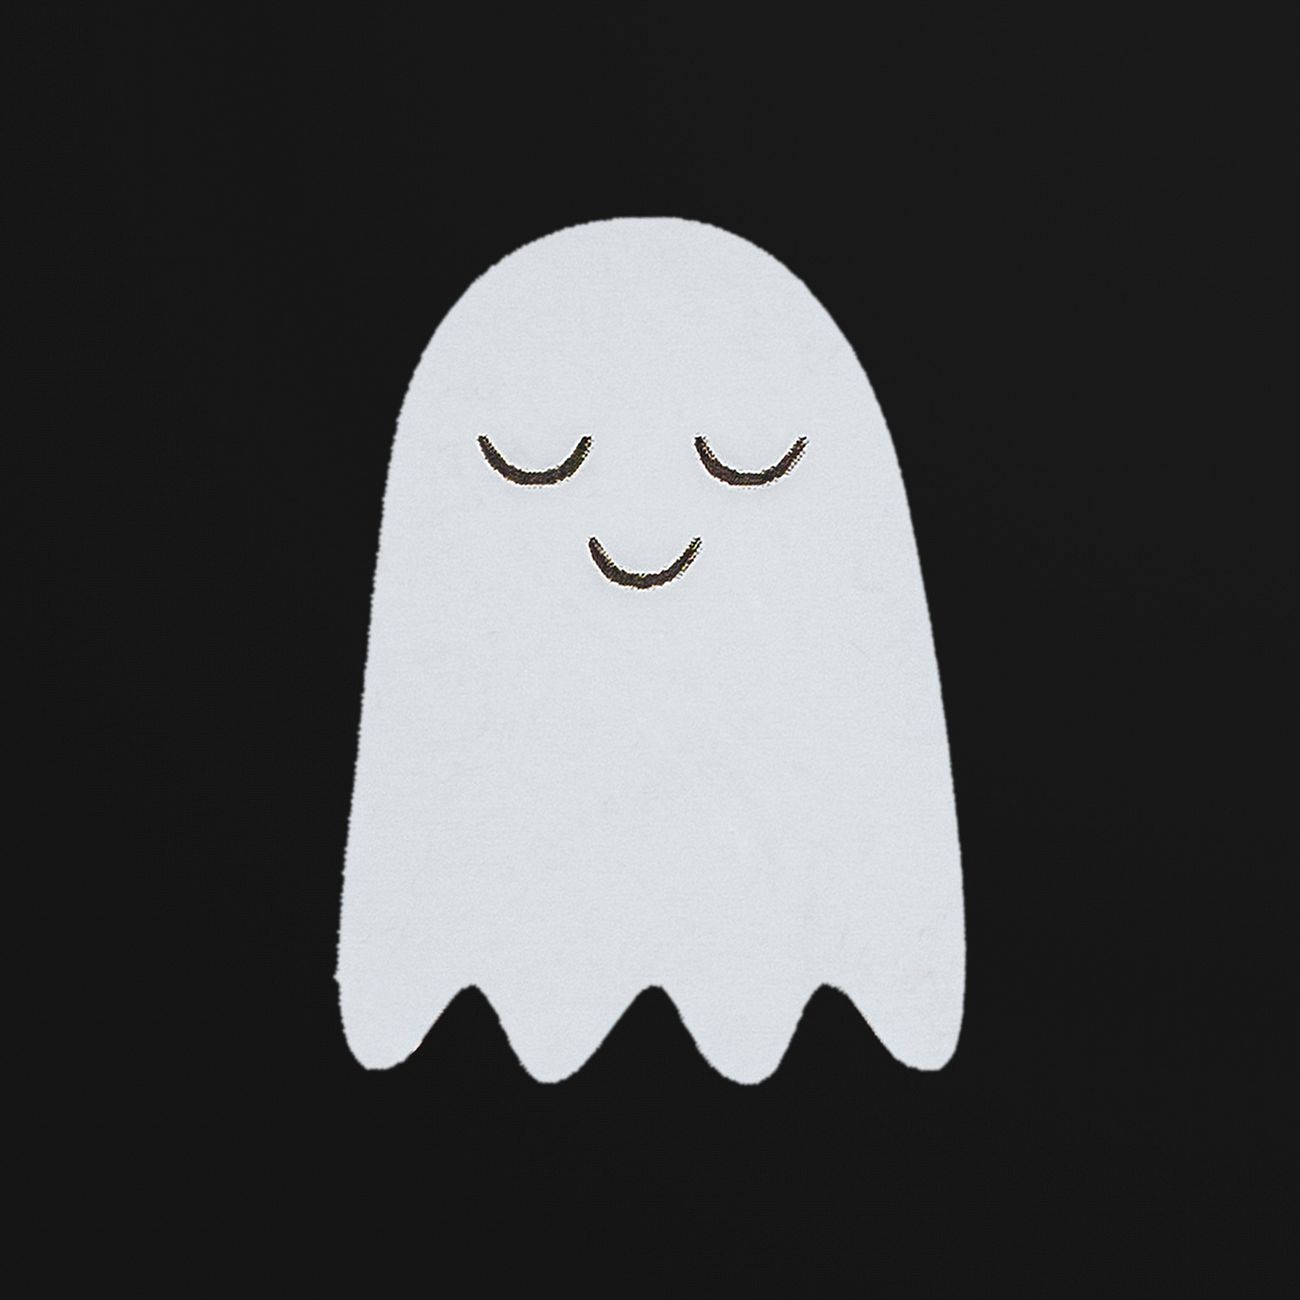 Ghost Images | Free Photos, PNG Stickers, Wallpapers & Backgrounds